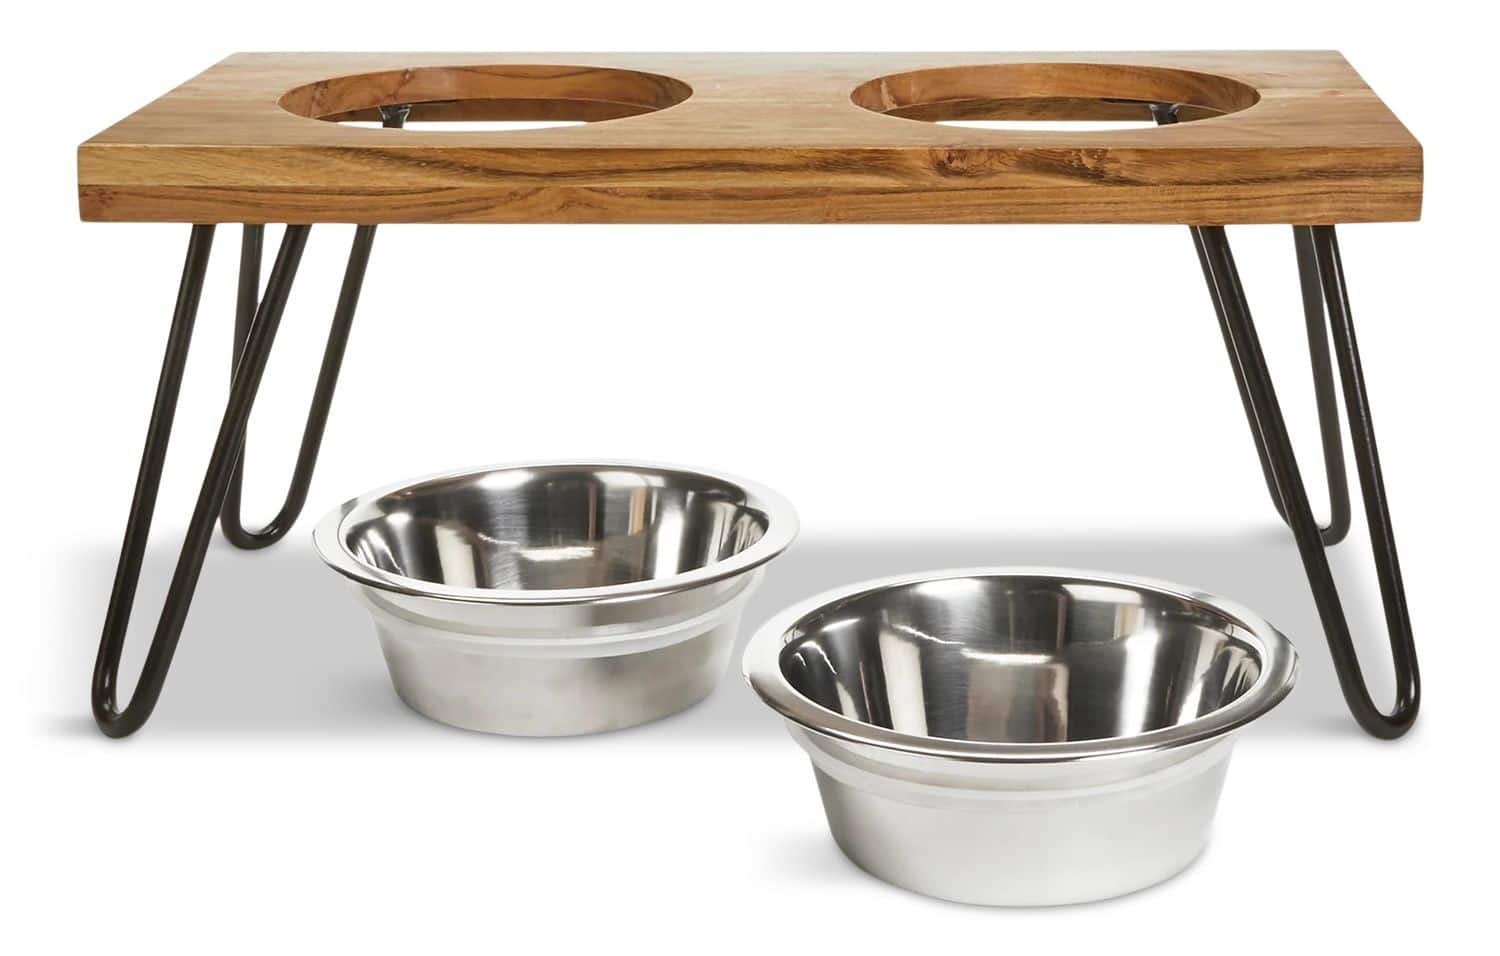 https://media-www.canadiantire.ca/product/living/pet-care/pet-accessories/1427474/petco-elevated-wd-dd-w-ss-dog-bowls-4-6-cups-6e7d151f-11cf-4bc5-8961-84cf0ae58d11-jpgrendition.jpg